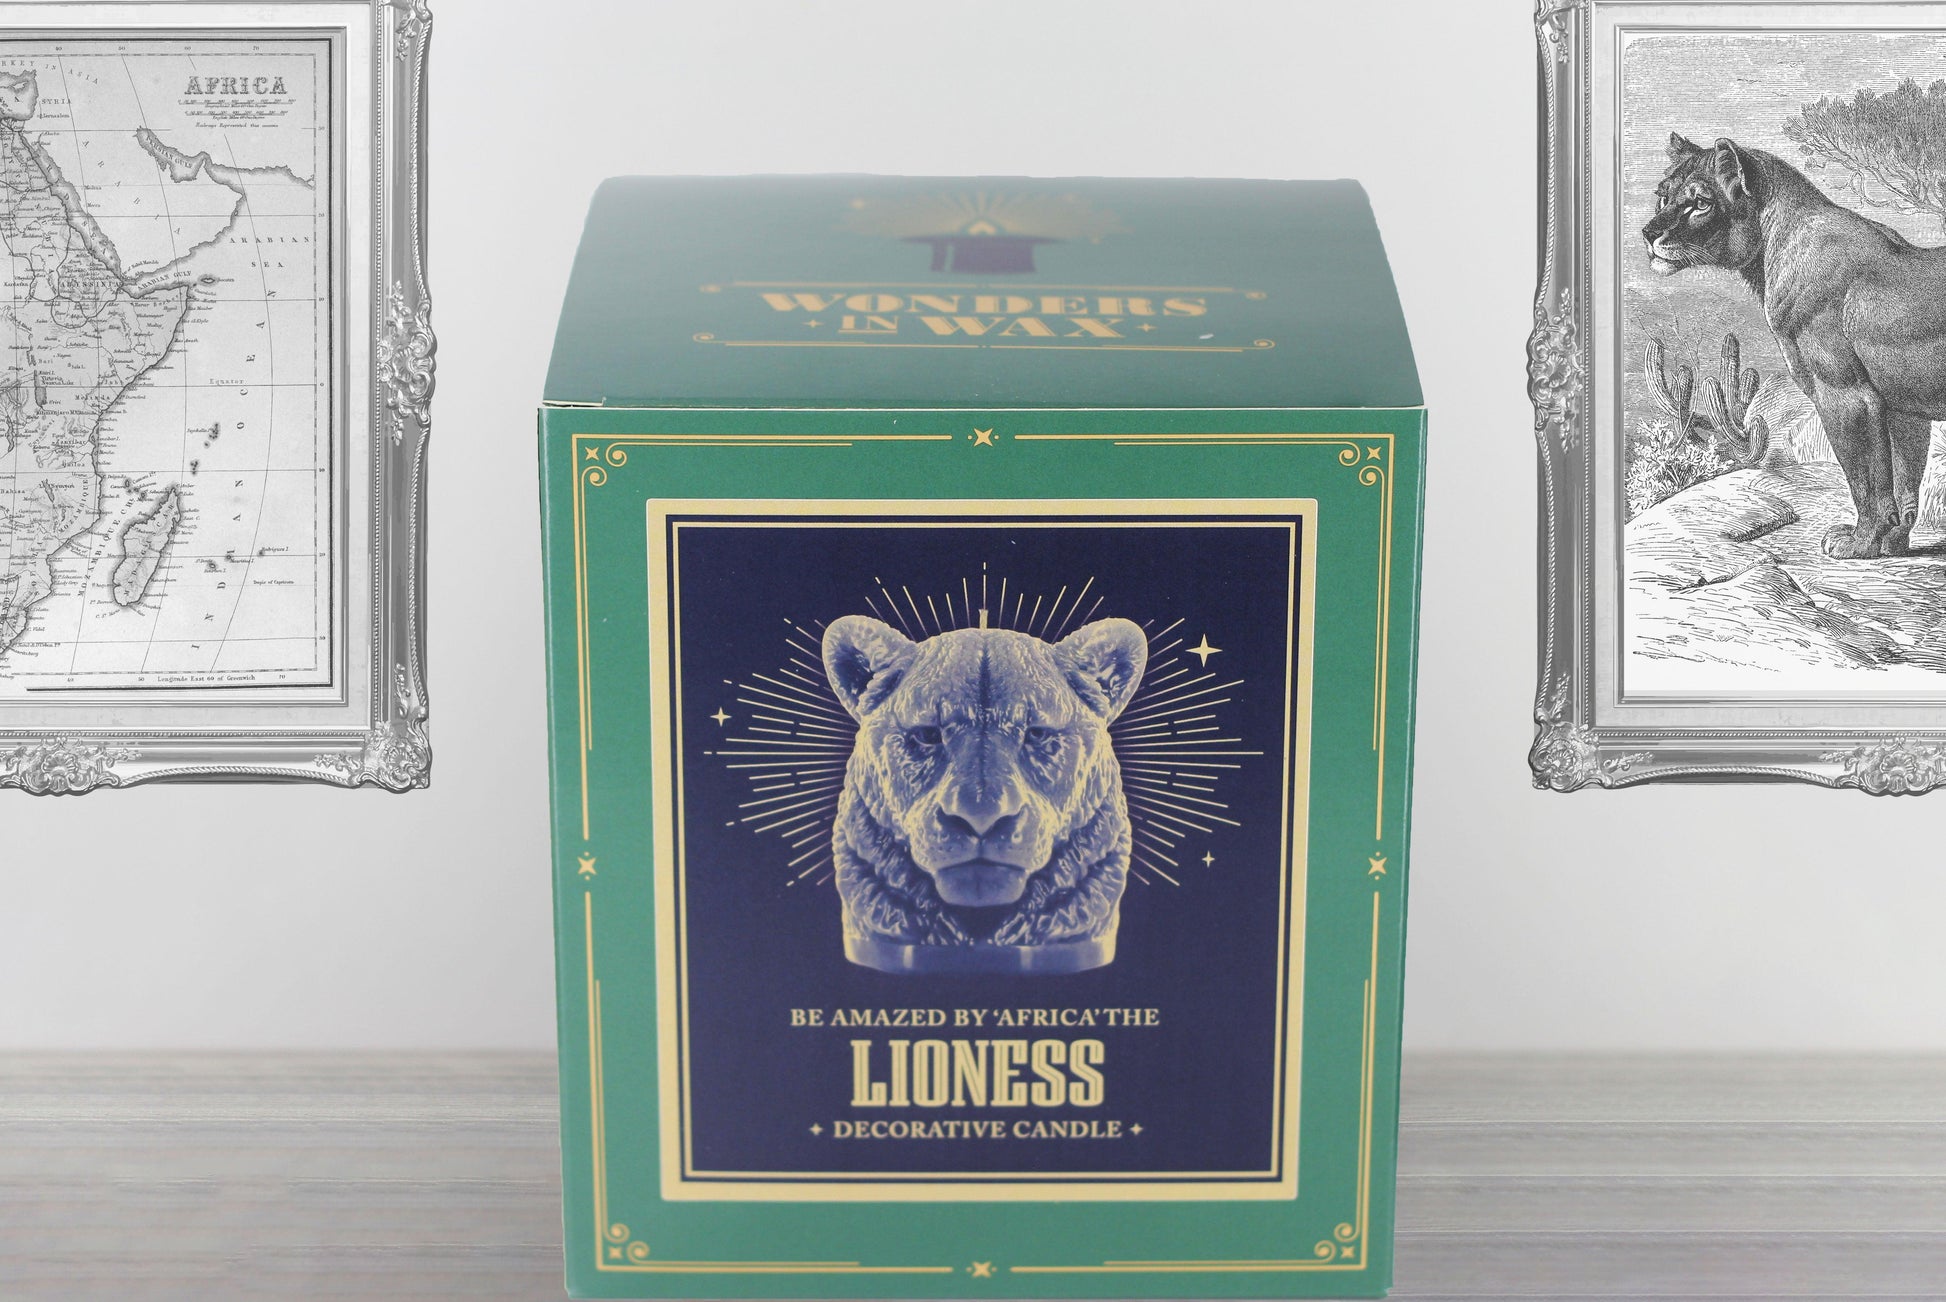 Retail Box Packaging for Large 3D Lioness Bust Candle in Red Colour, Handmade by Wonders in Wax in Poole, England.